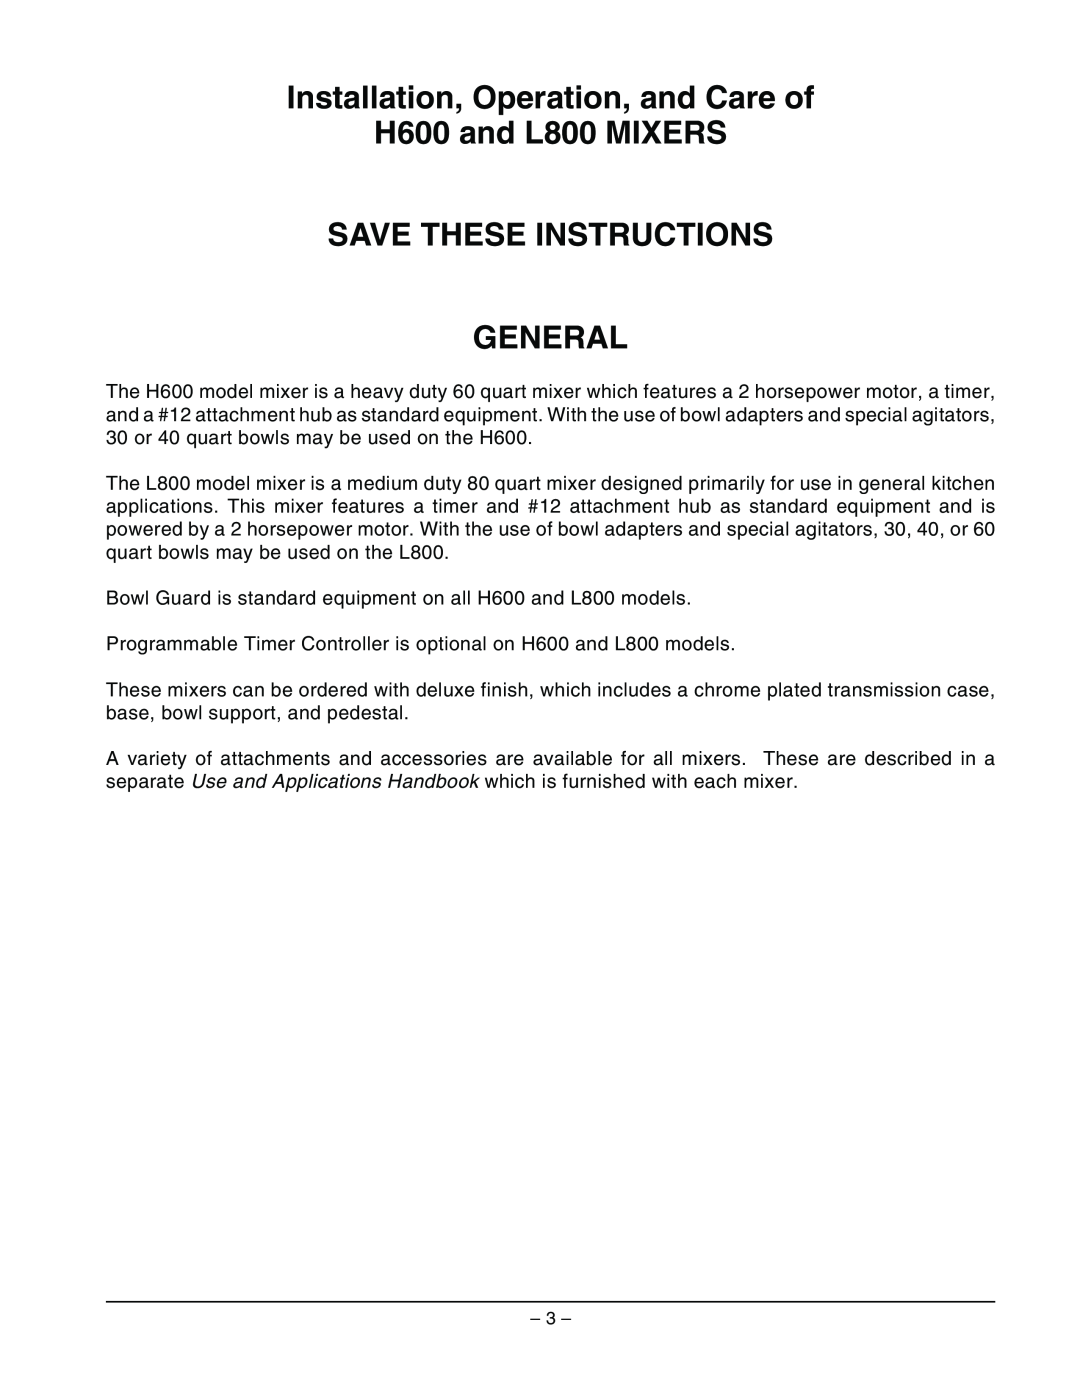 Hobart manual Installation, Operation, and Care of H600 and L800 MIXERS, Save These Instructions General 